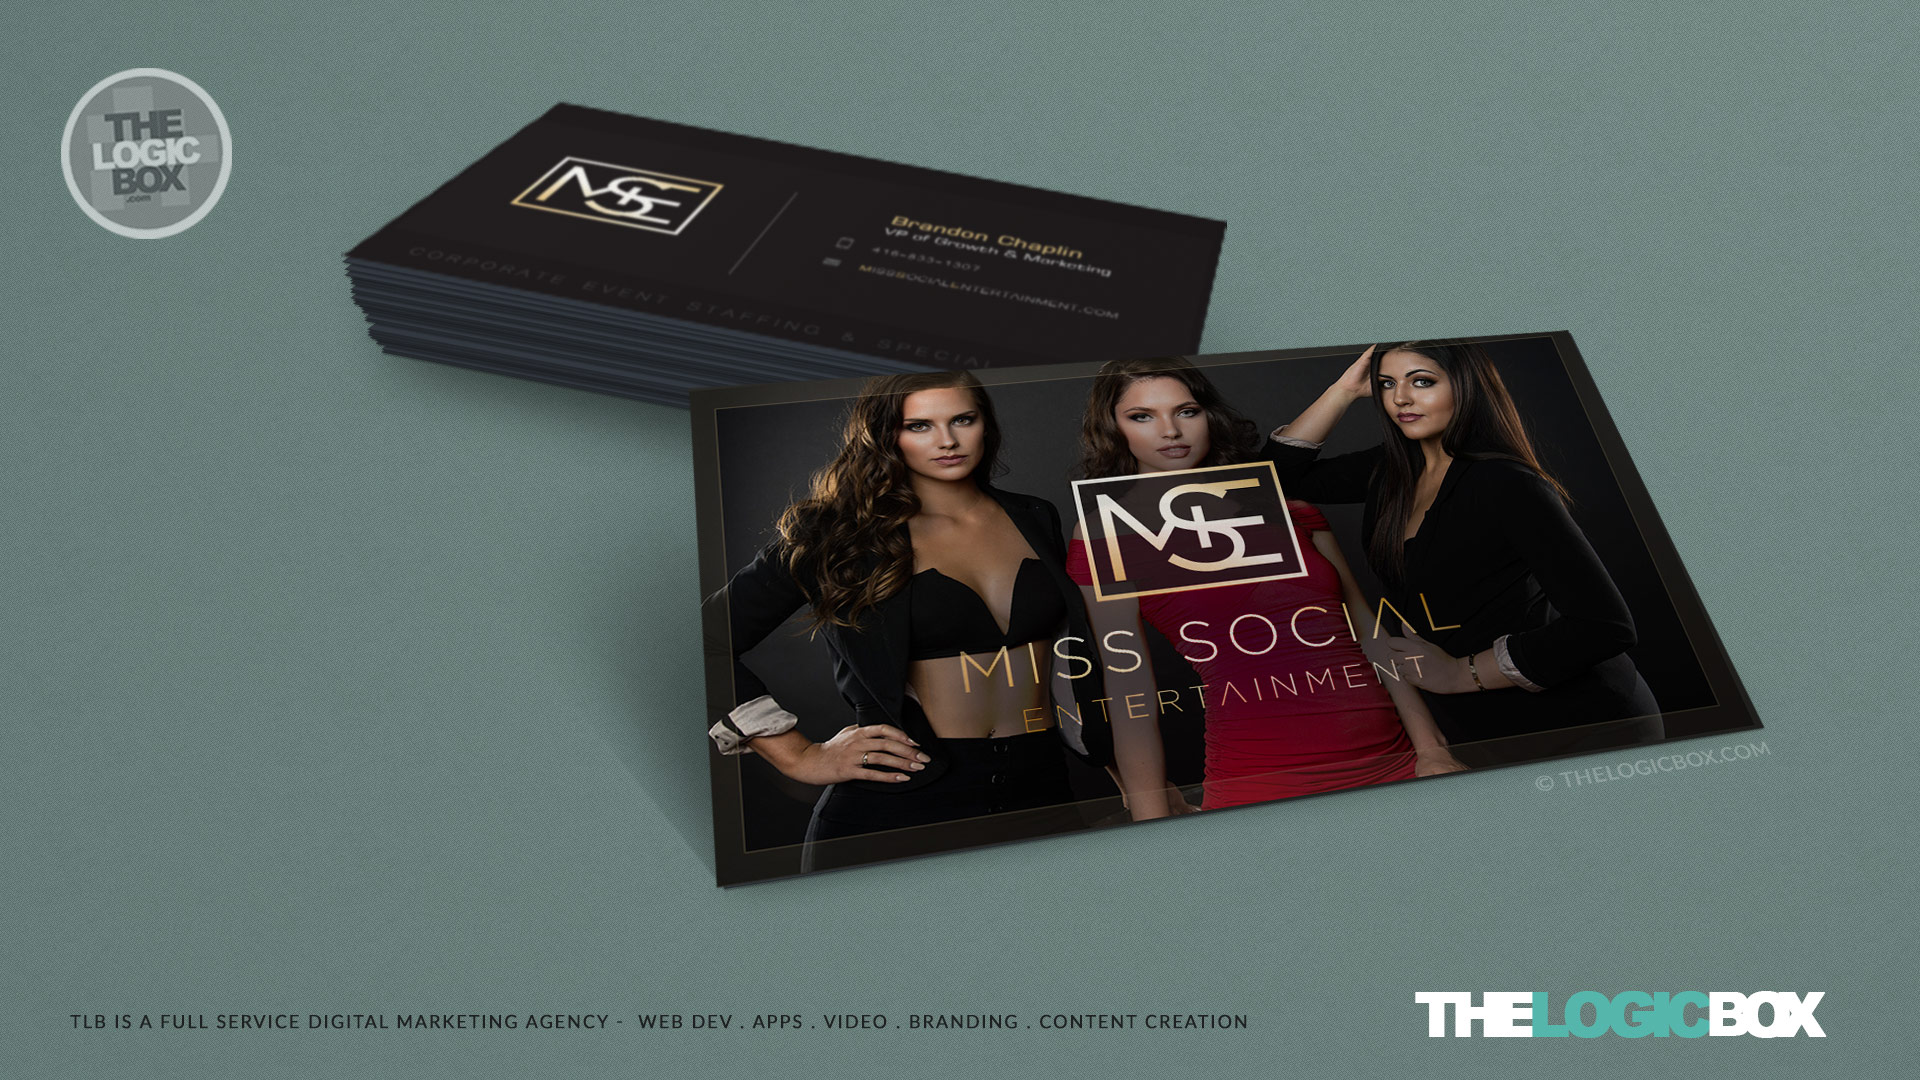 business-card-presentation-mockup-psd-1920x1080-thelogicbox-miss-social-entertainment